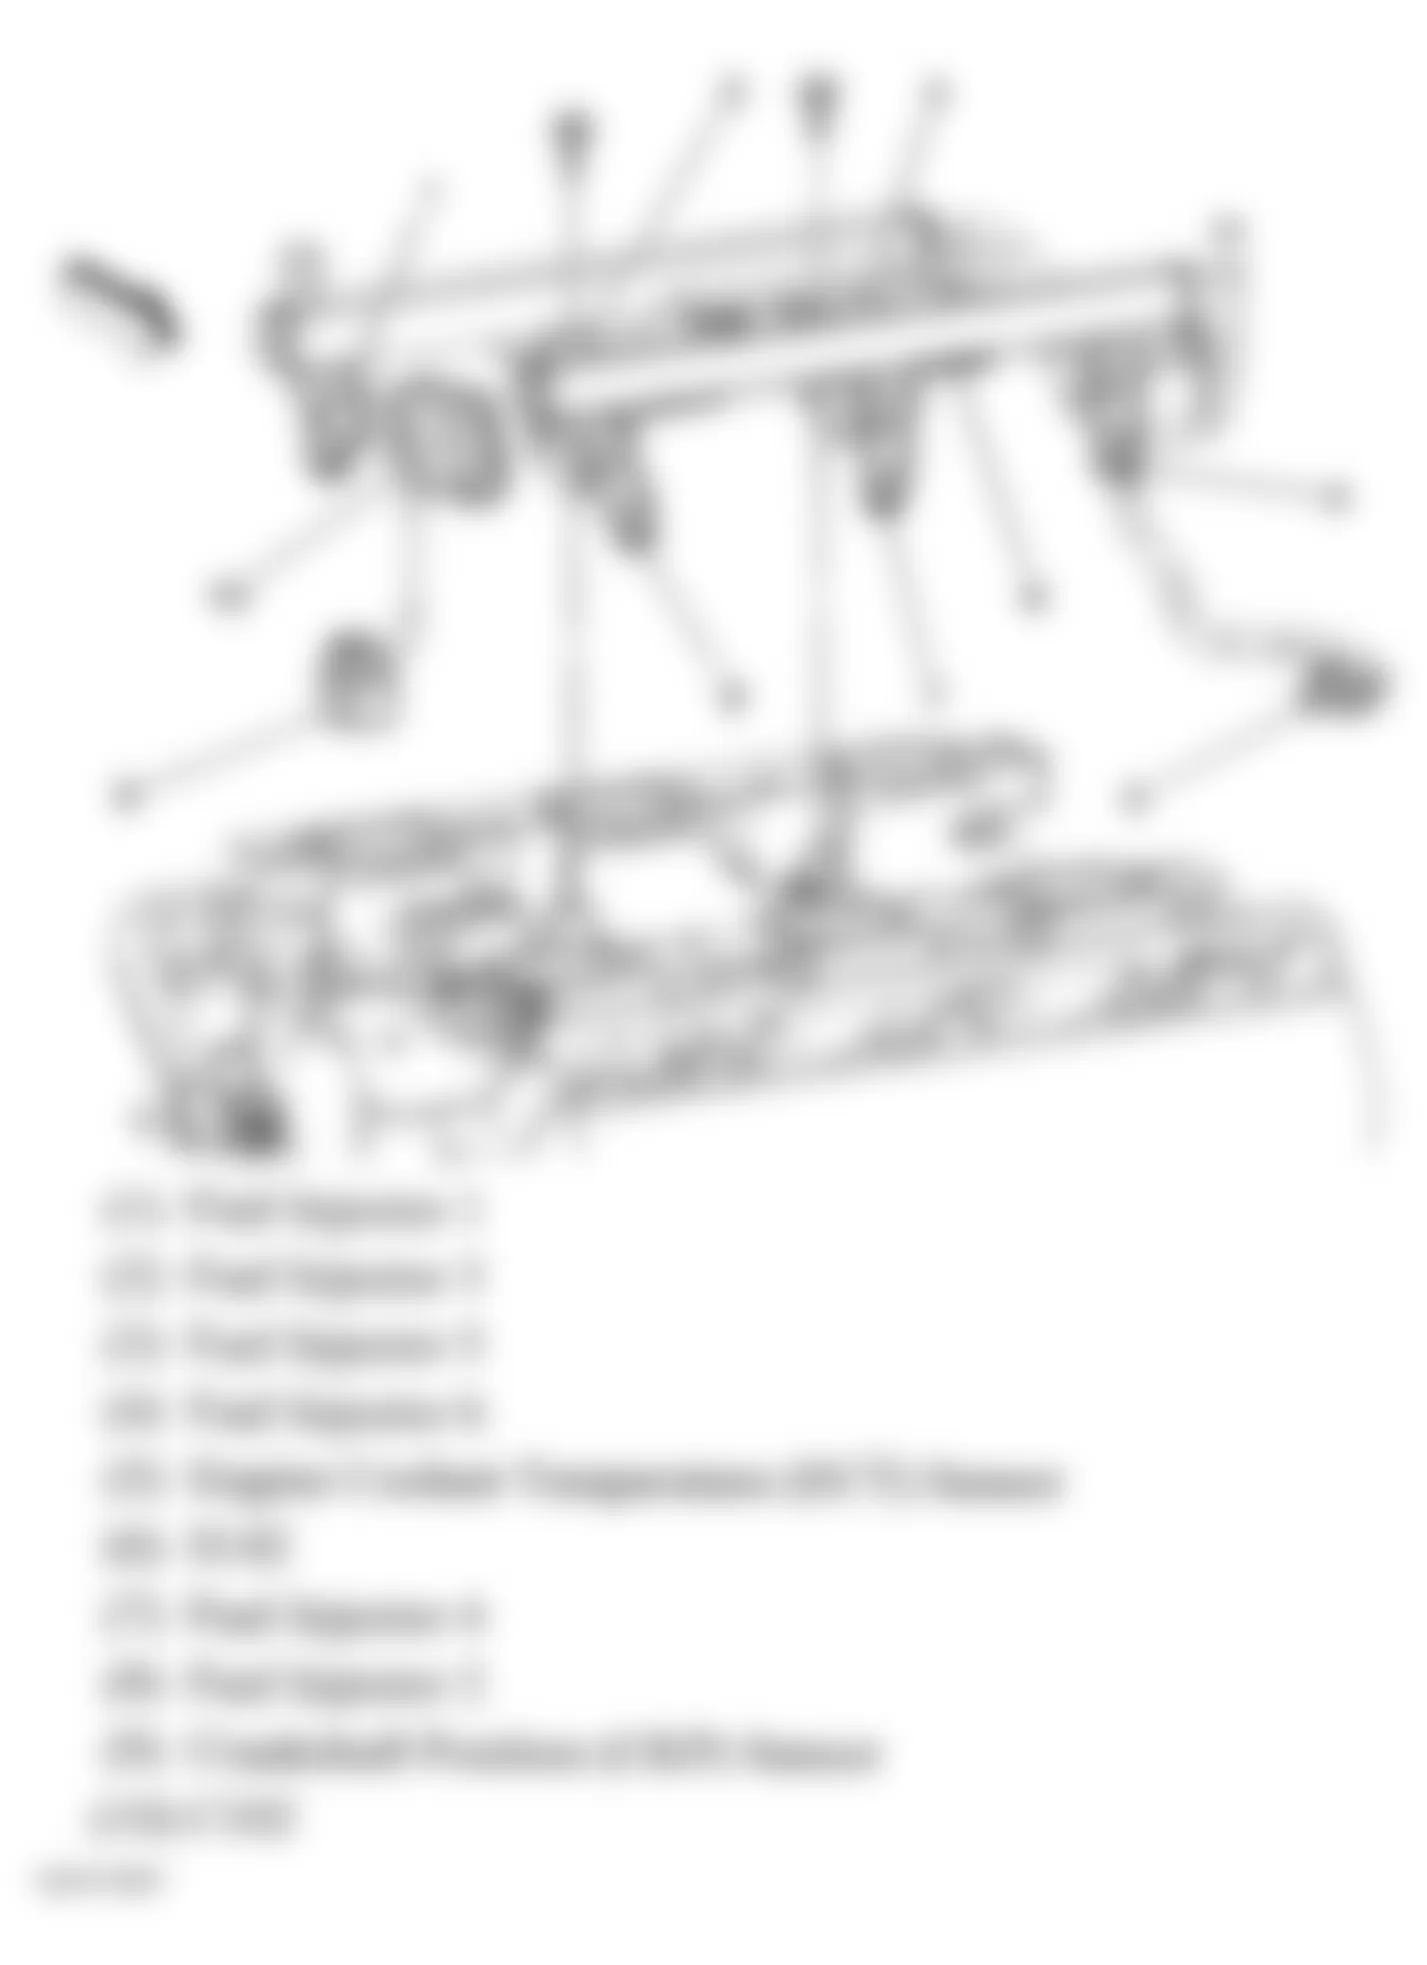 Buick Terraza CXL 2006 - Component Locations -  Engine Assembly (3.9L)